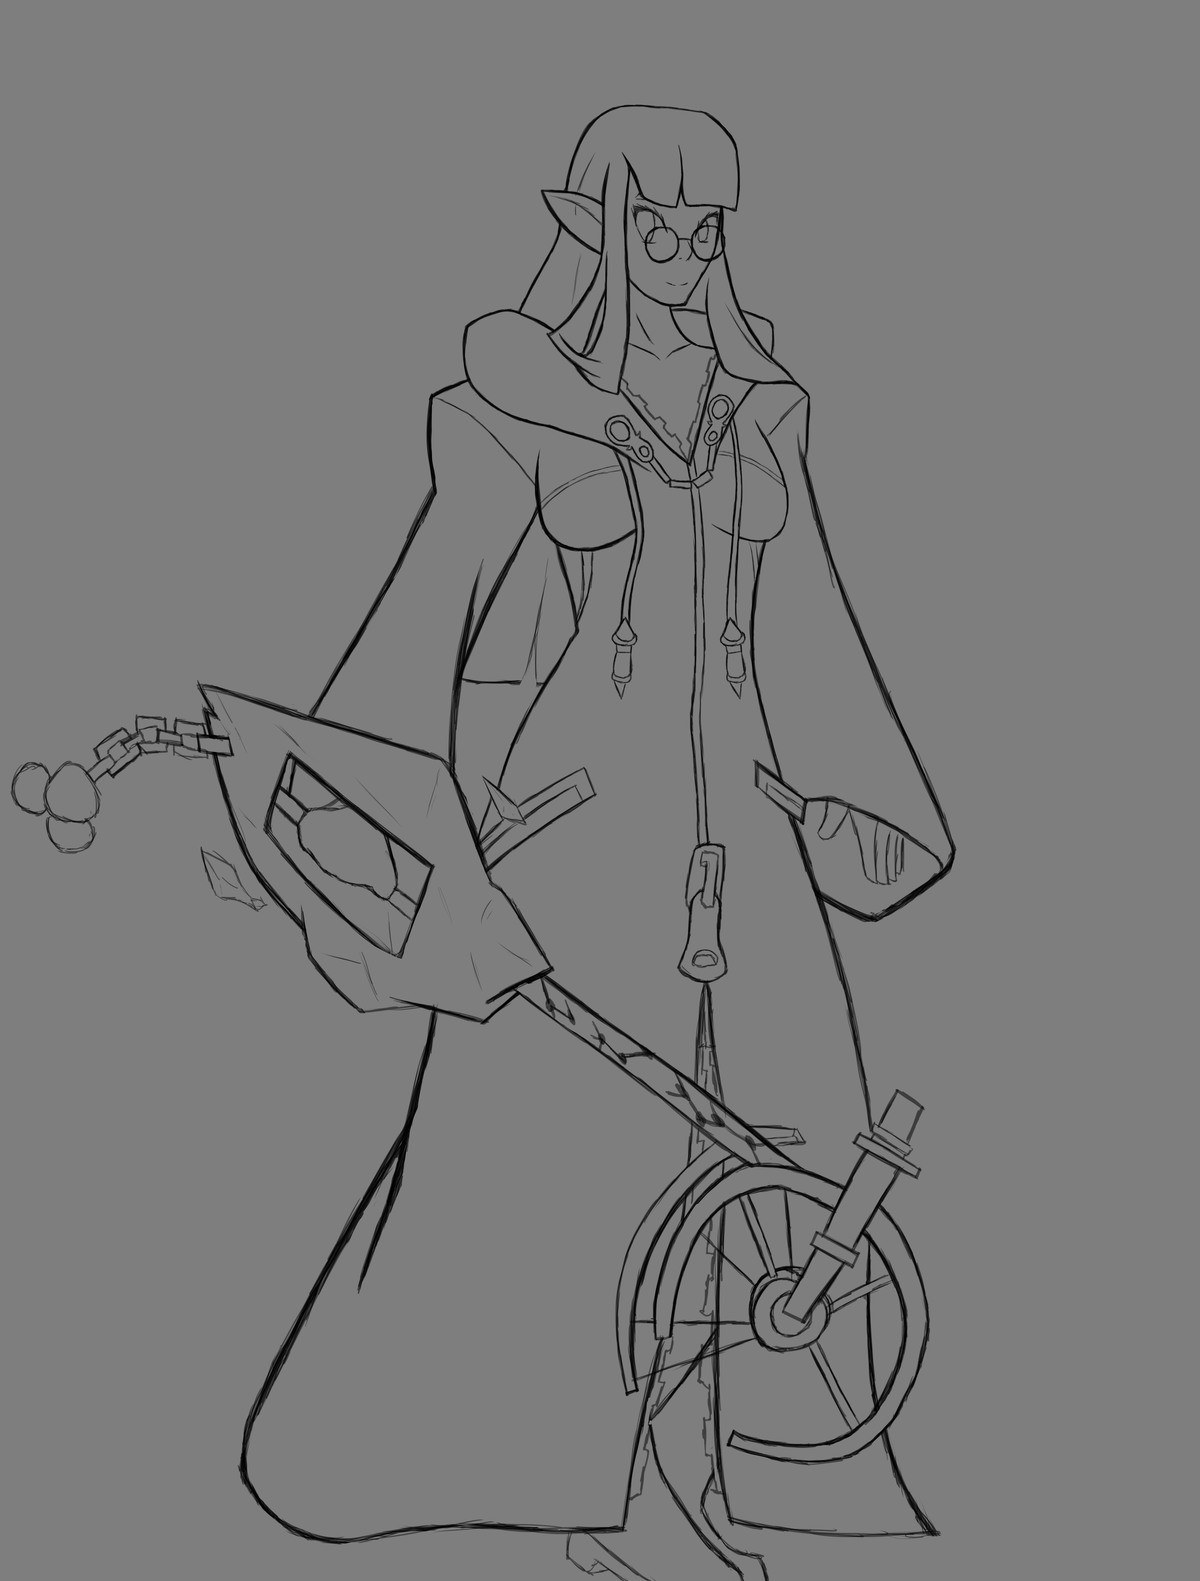 DailyDrawing day 284. More Halloween costumes for our dnd campaign. this is our parties druid as an orginization 13 member. also to the 5 people who like my stu